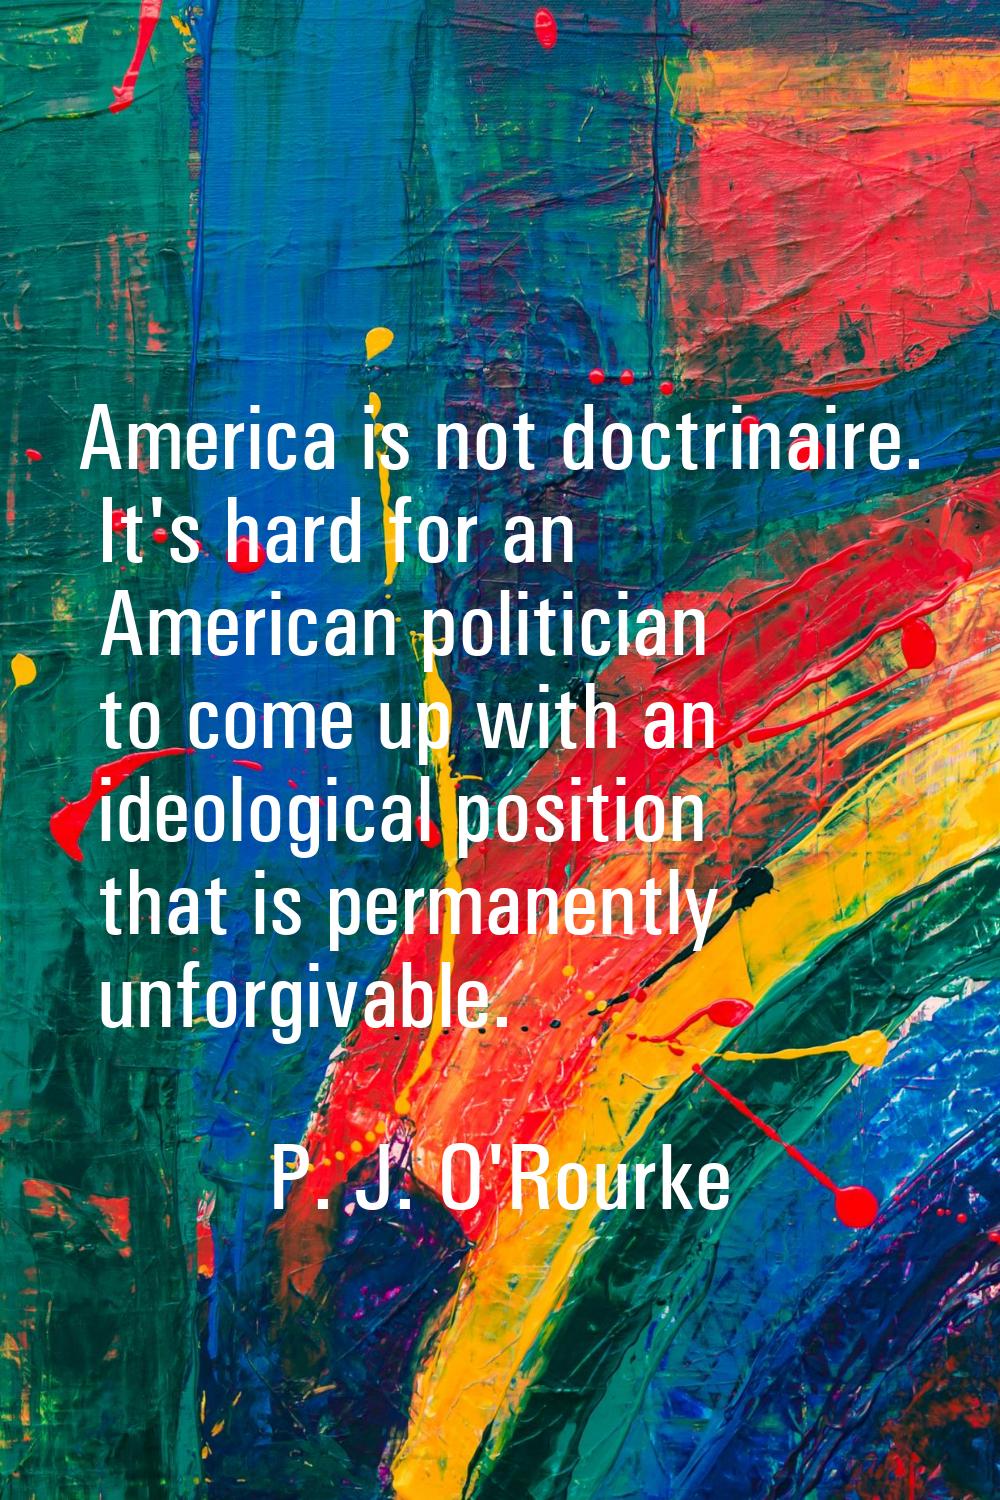 America is not doctrinaire. It's hard for an American politician to come up with an ideological pos